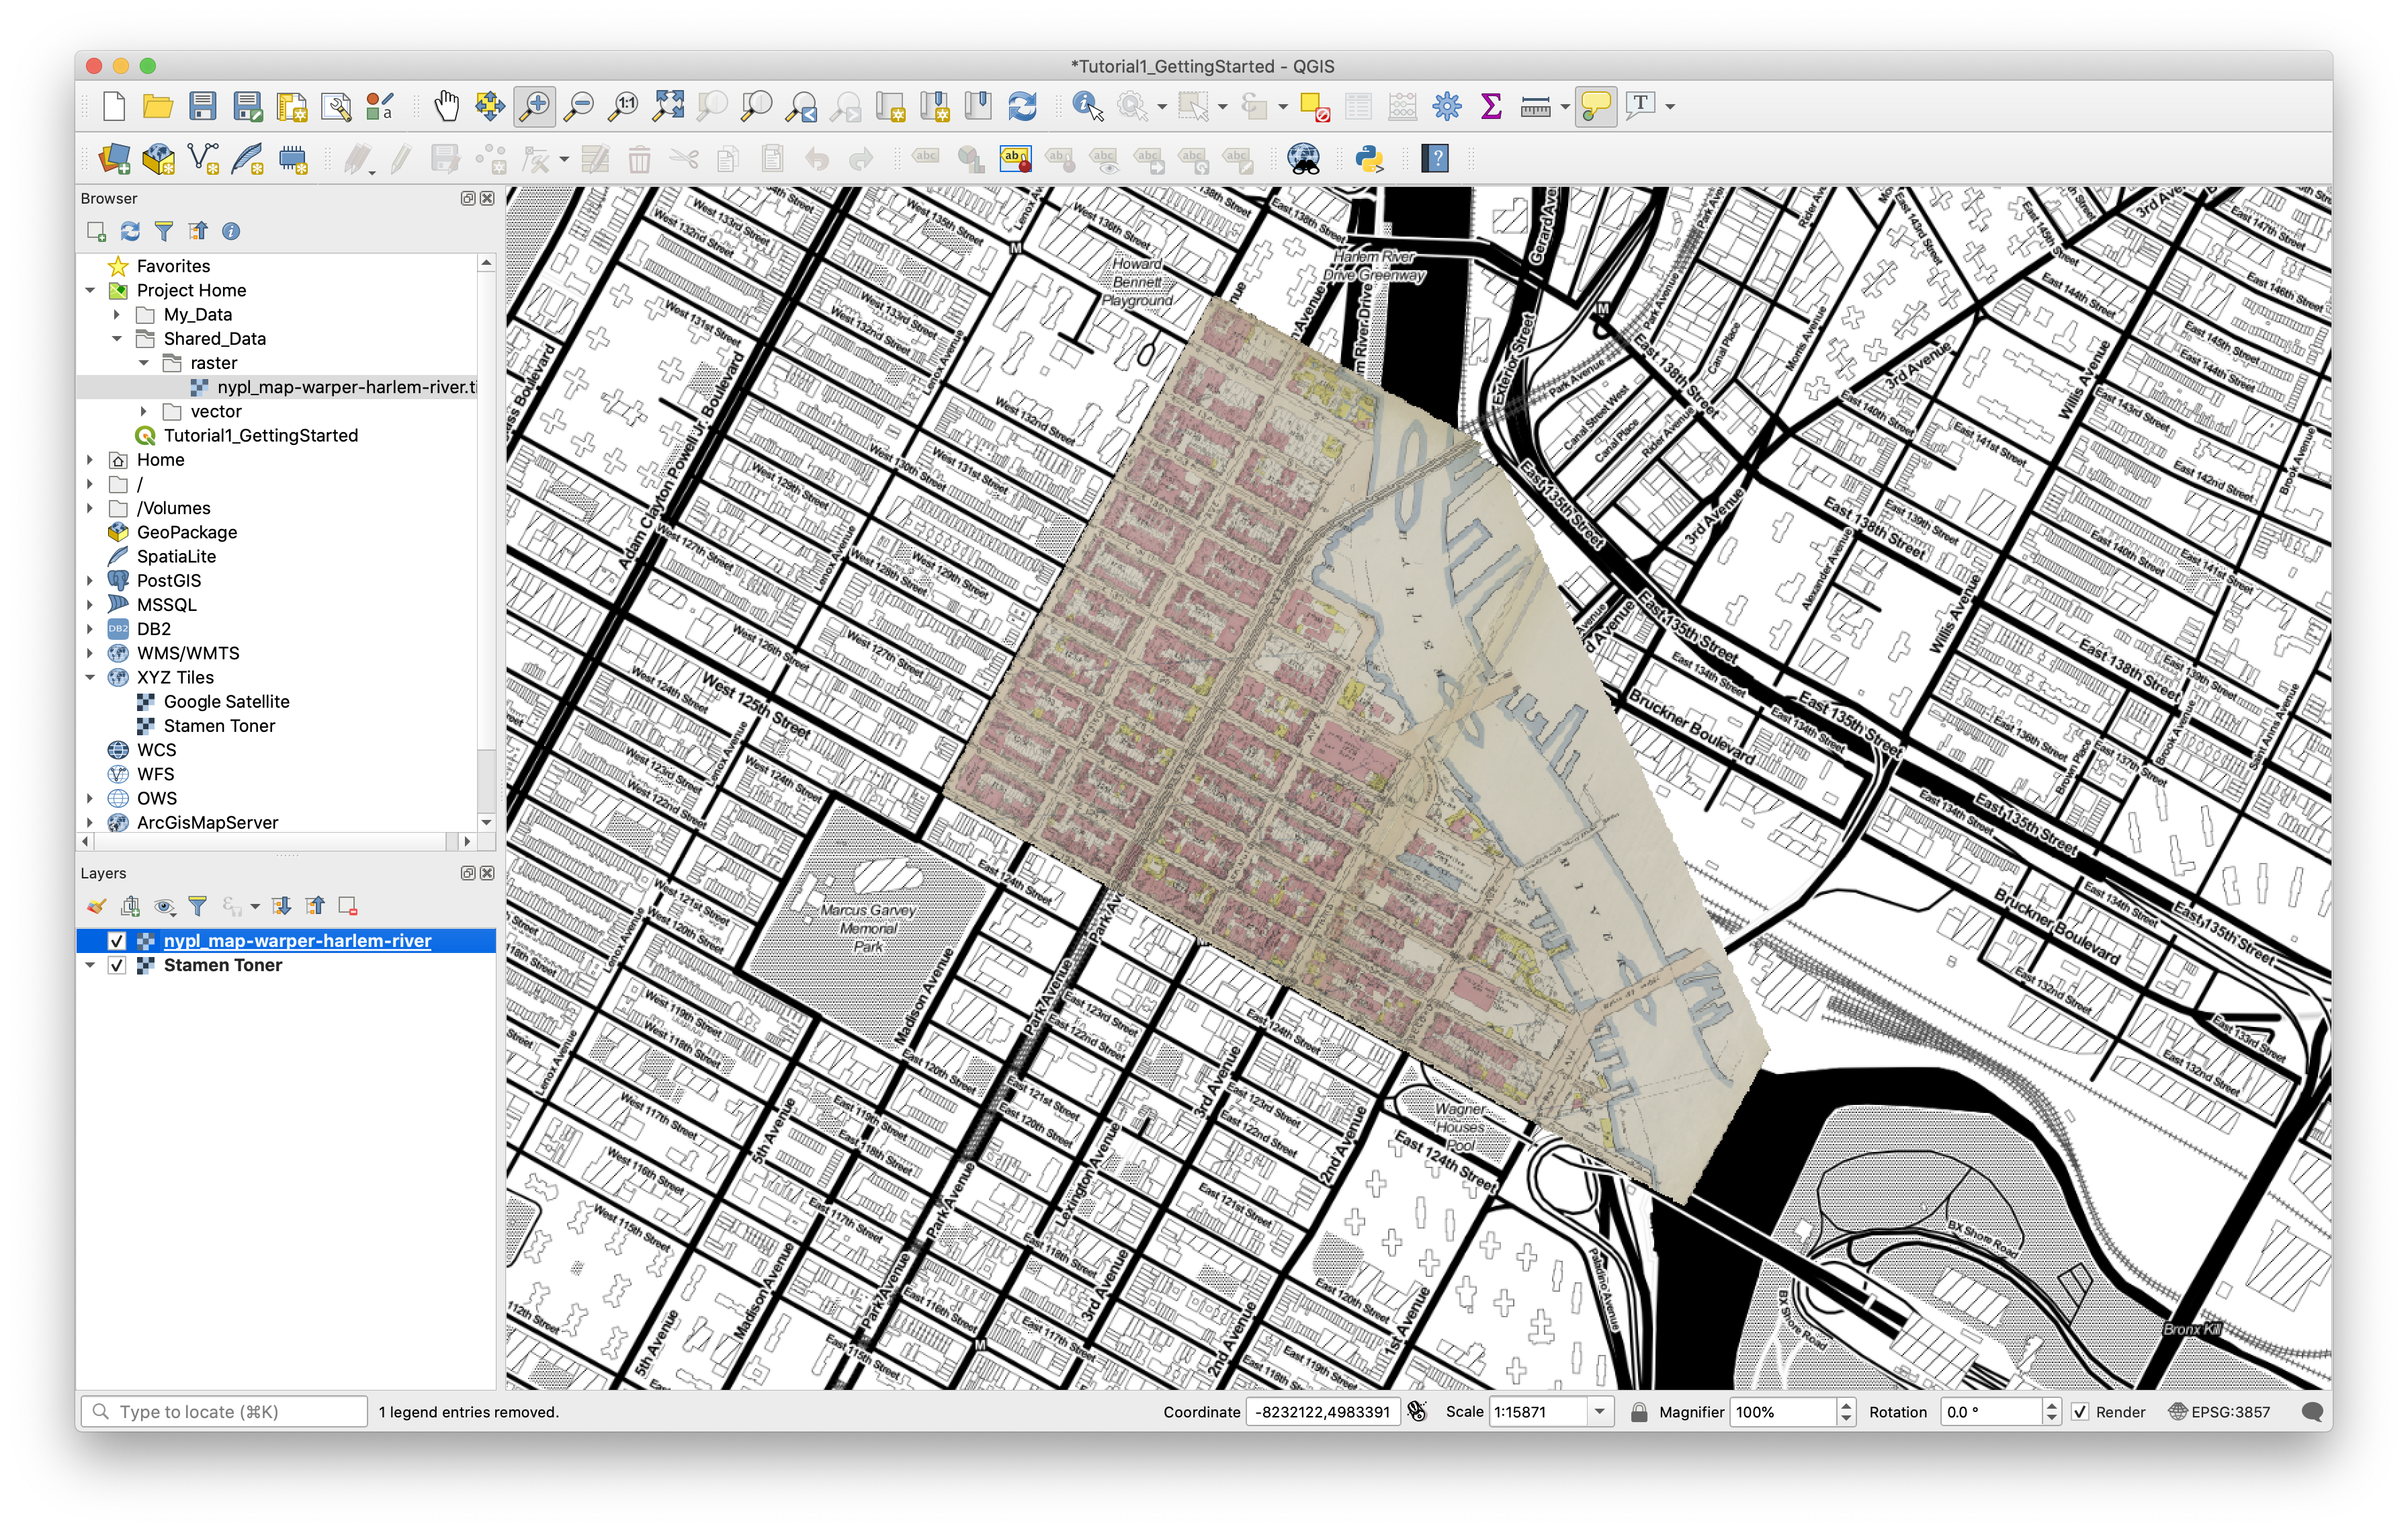 qgis view with data from tiff file